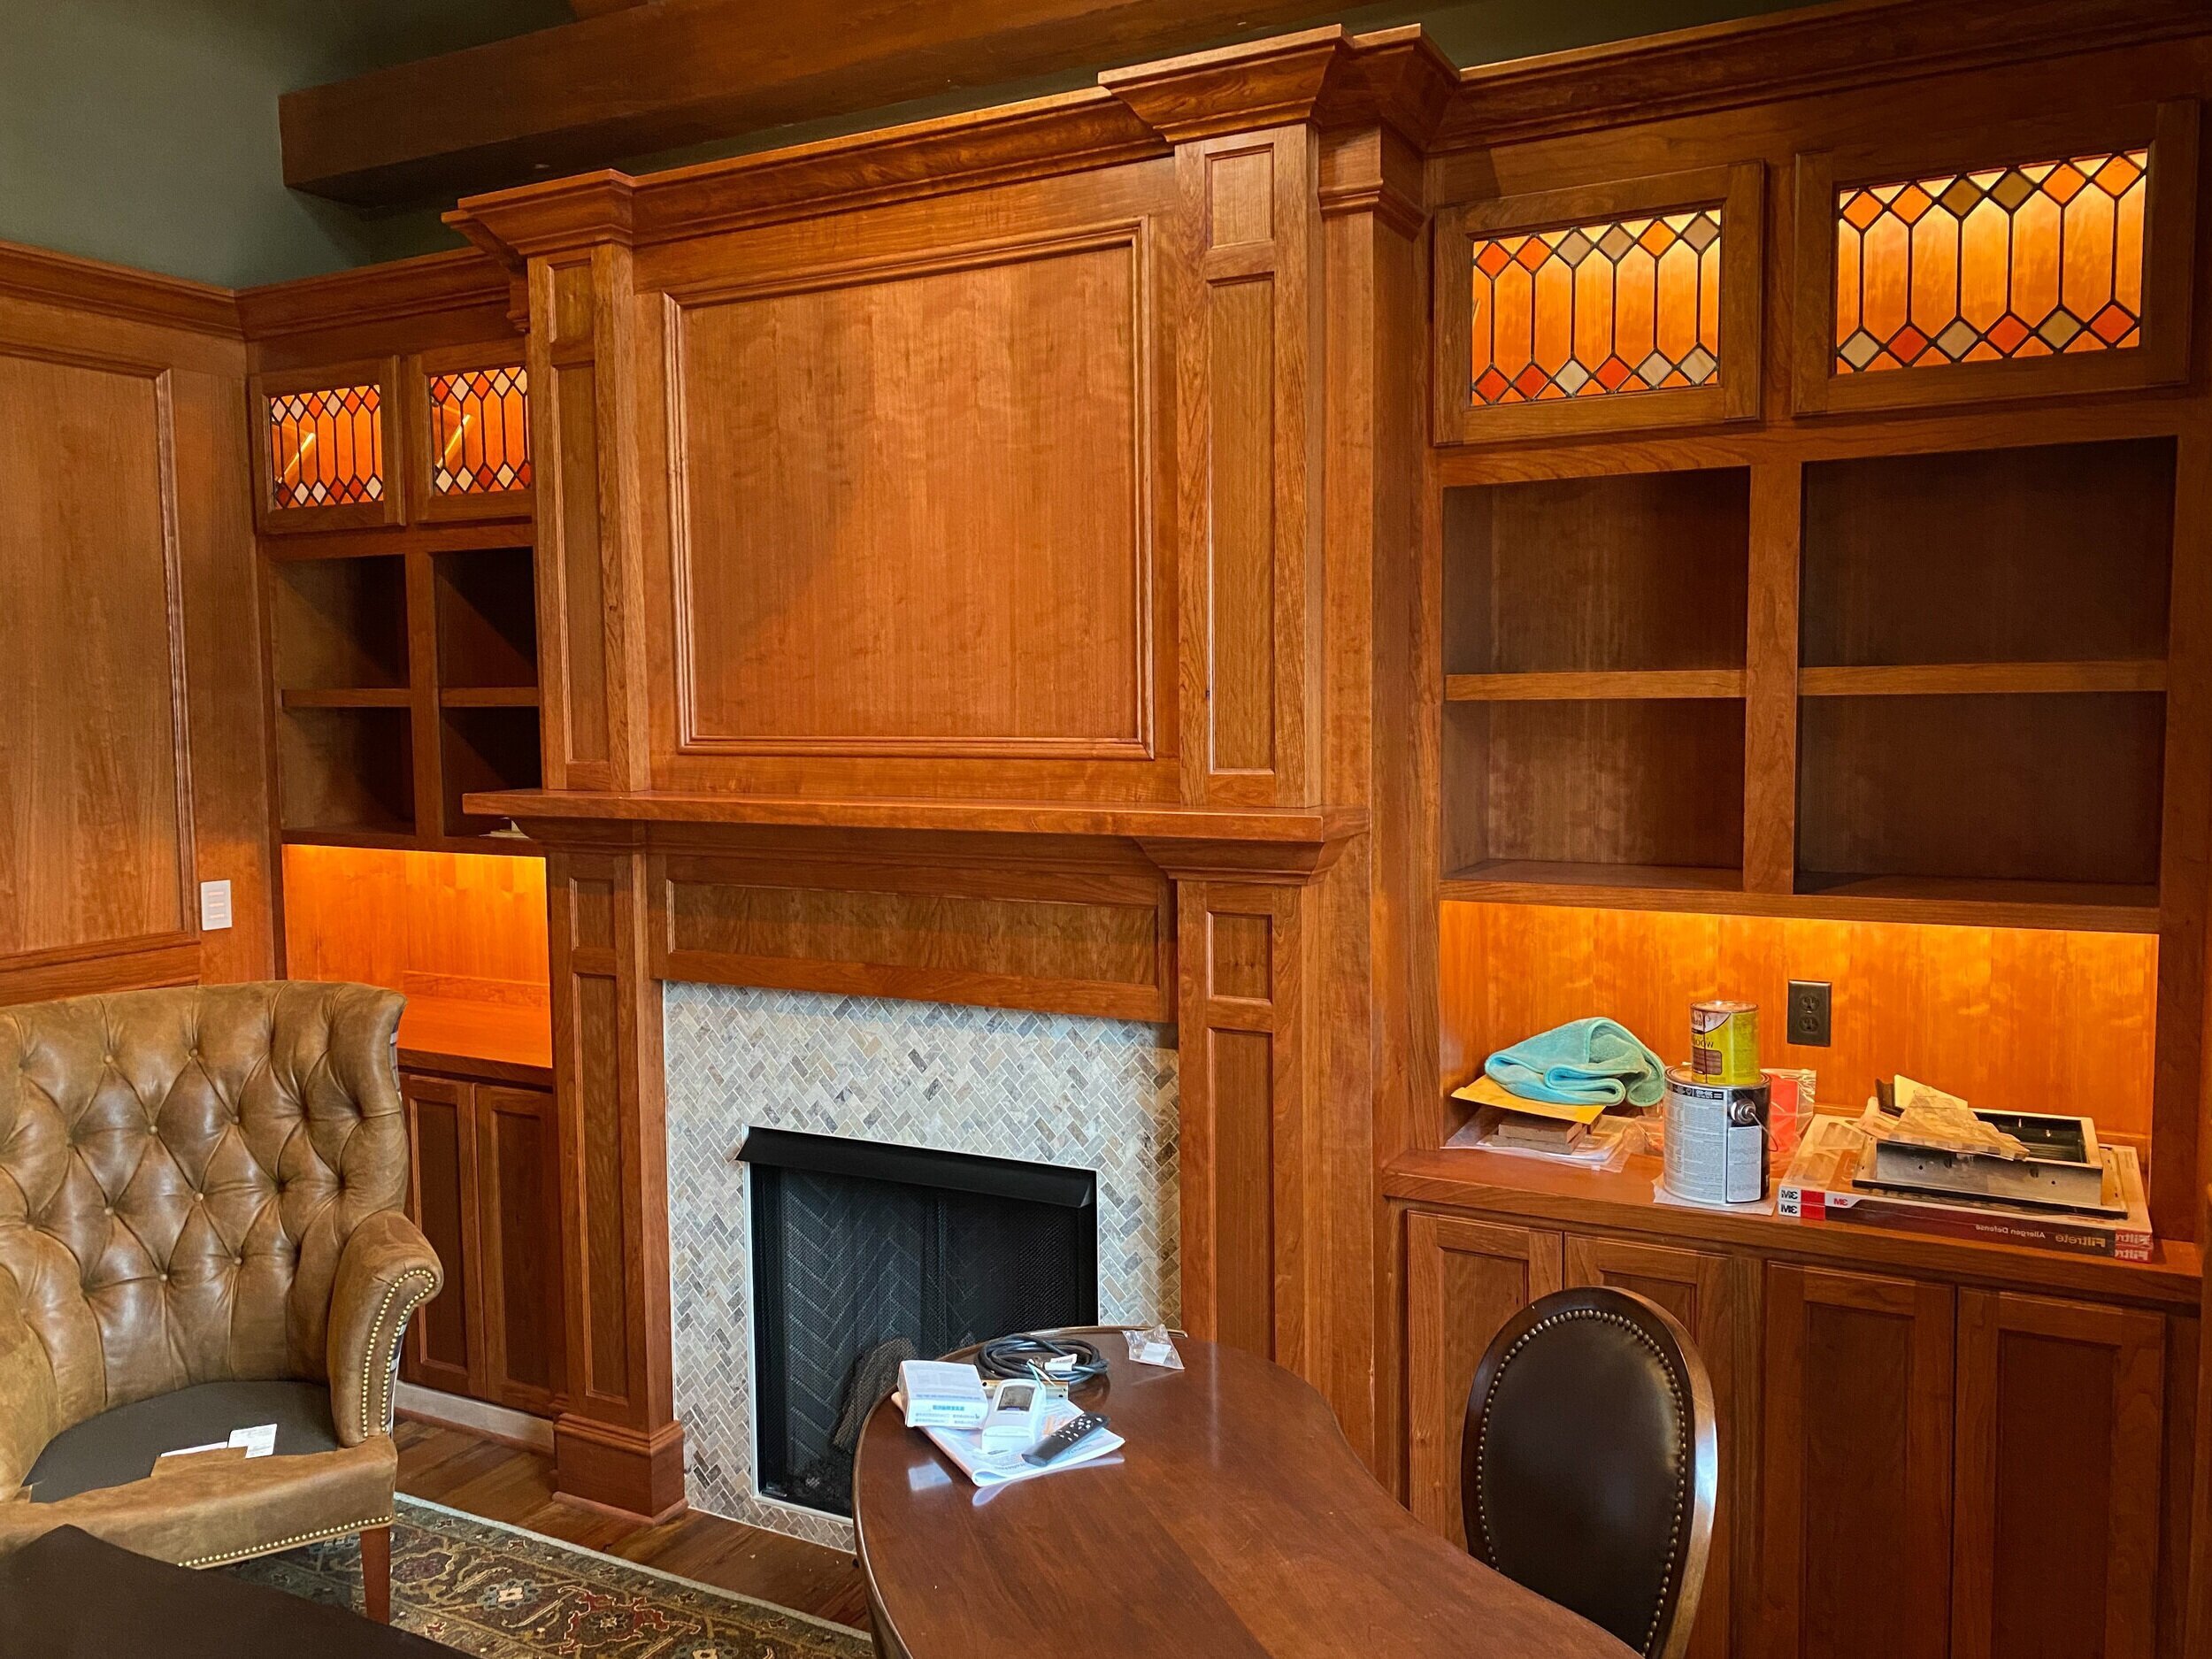 honey toned shaker style fireplace and built-ins with stained glass windows on upper cabints